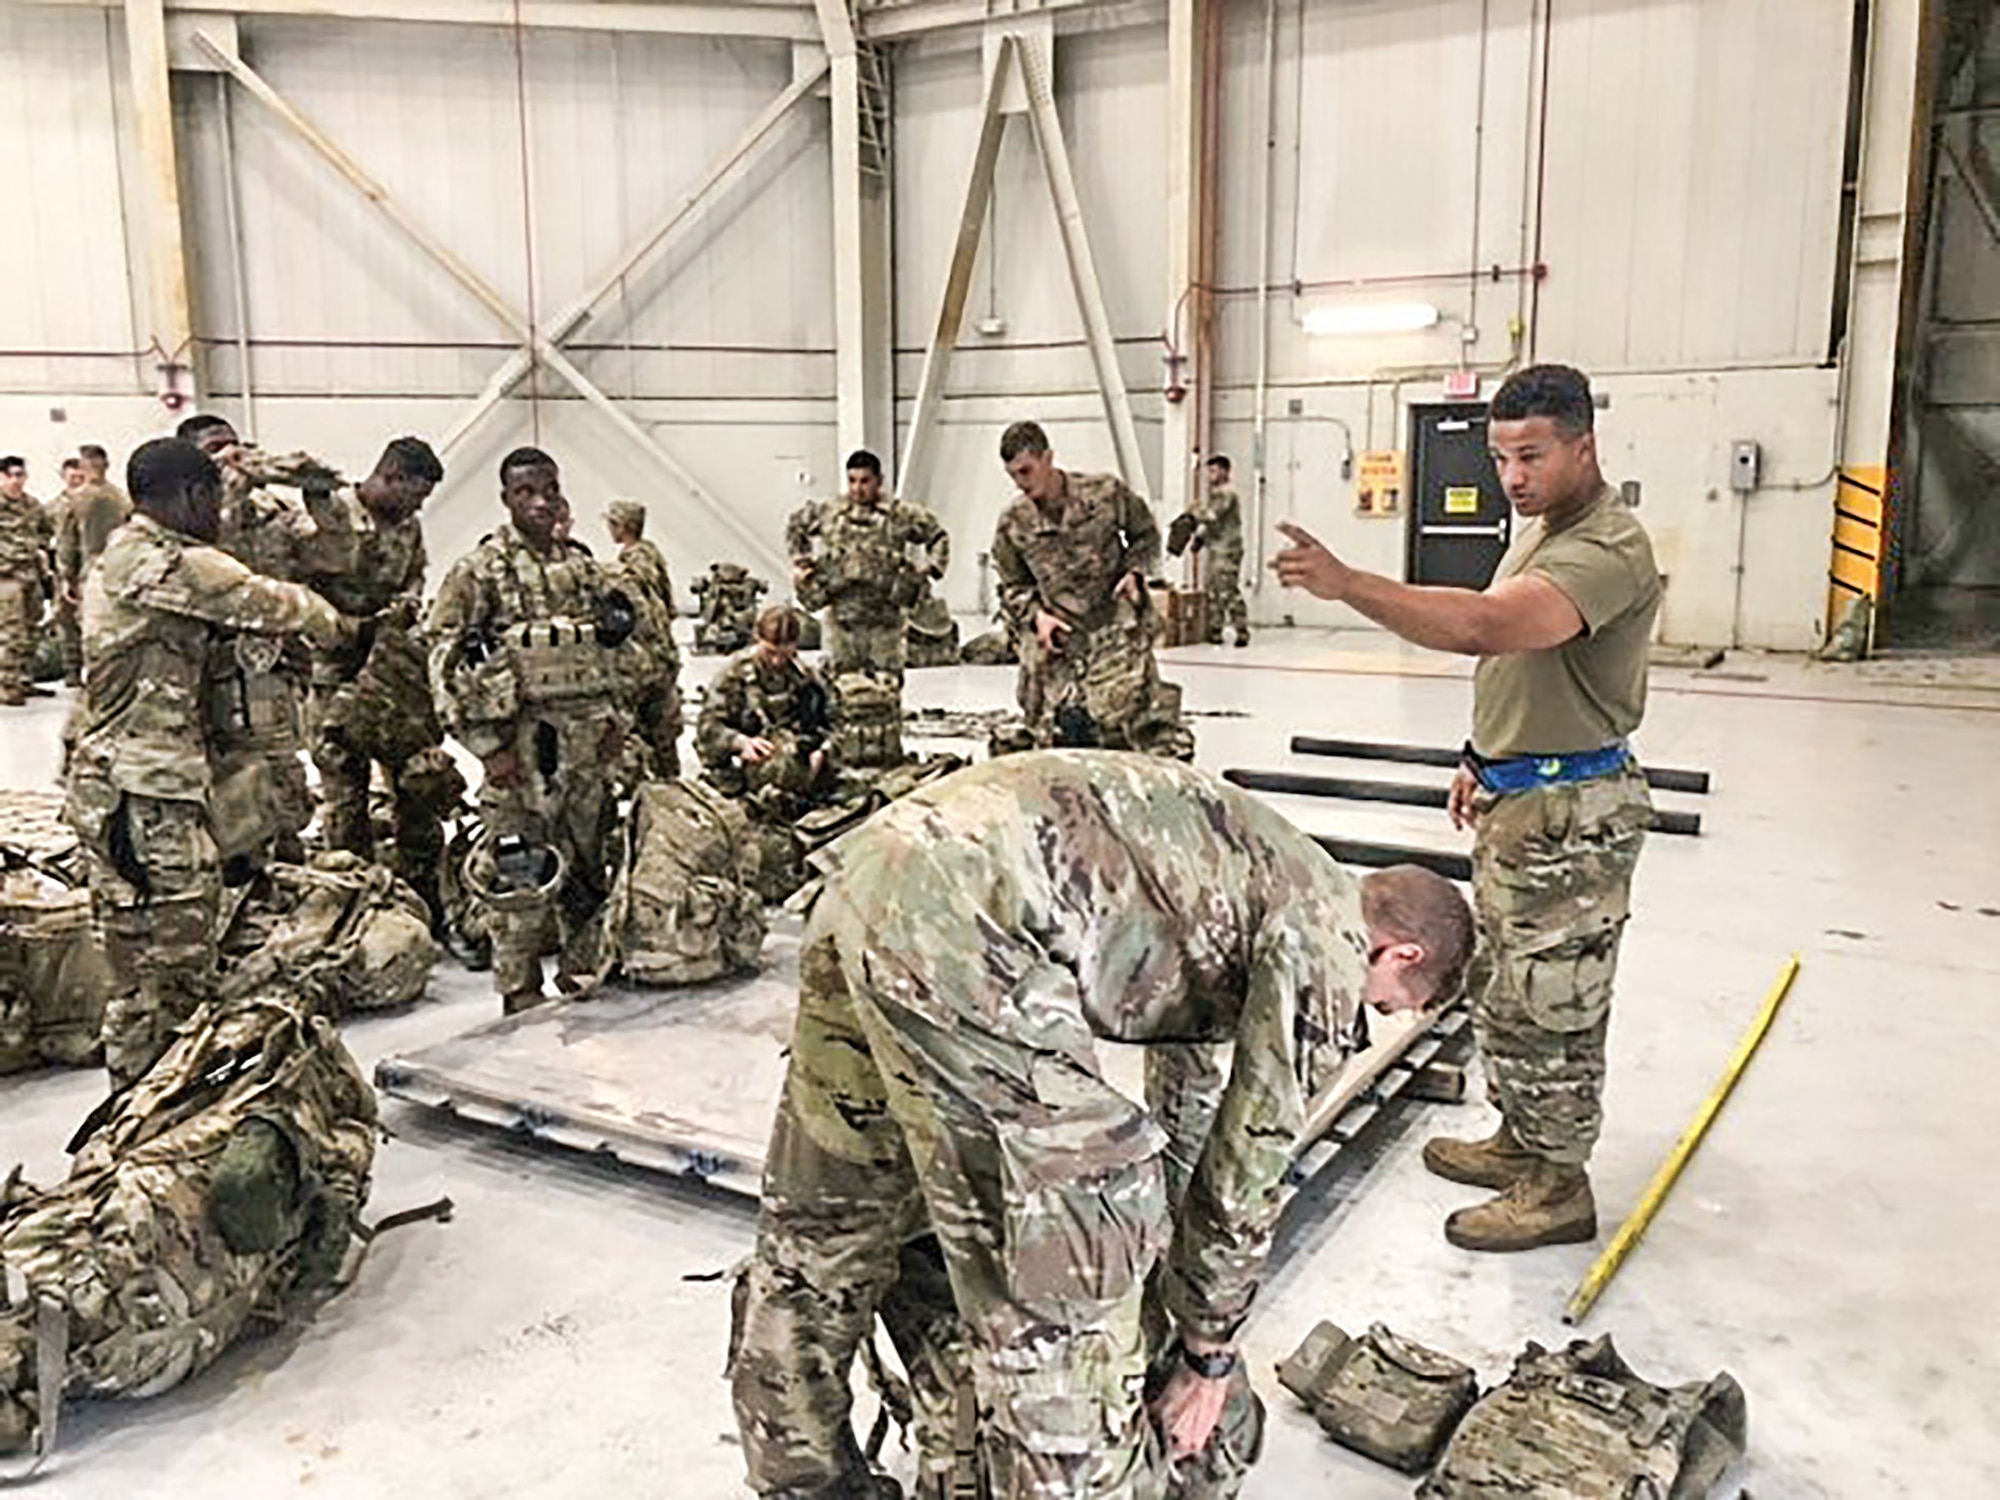 Senior Airman Jordan Scott, 87th Aerial Port Squadron, gives instructions to Soldiers on how to build a pallet. During their August 2021 annual tour at Joint Base Charleston, South Carolina, Reserve Citizen Airmen from the 87th APS were tasked with supporting the current mission in Afghanistan while working alongside their active duty counterpart hosts from the 437th Aerial Port Squadron.